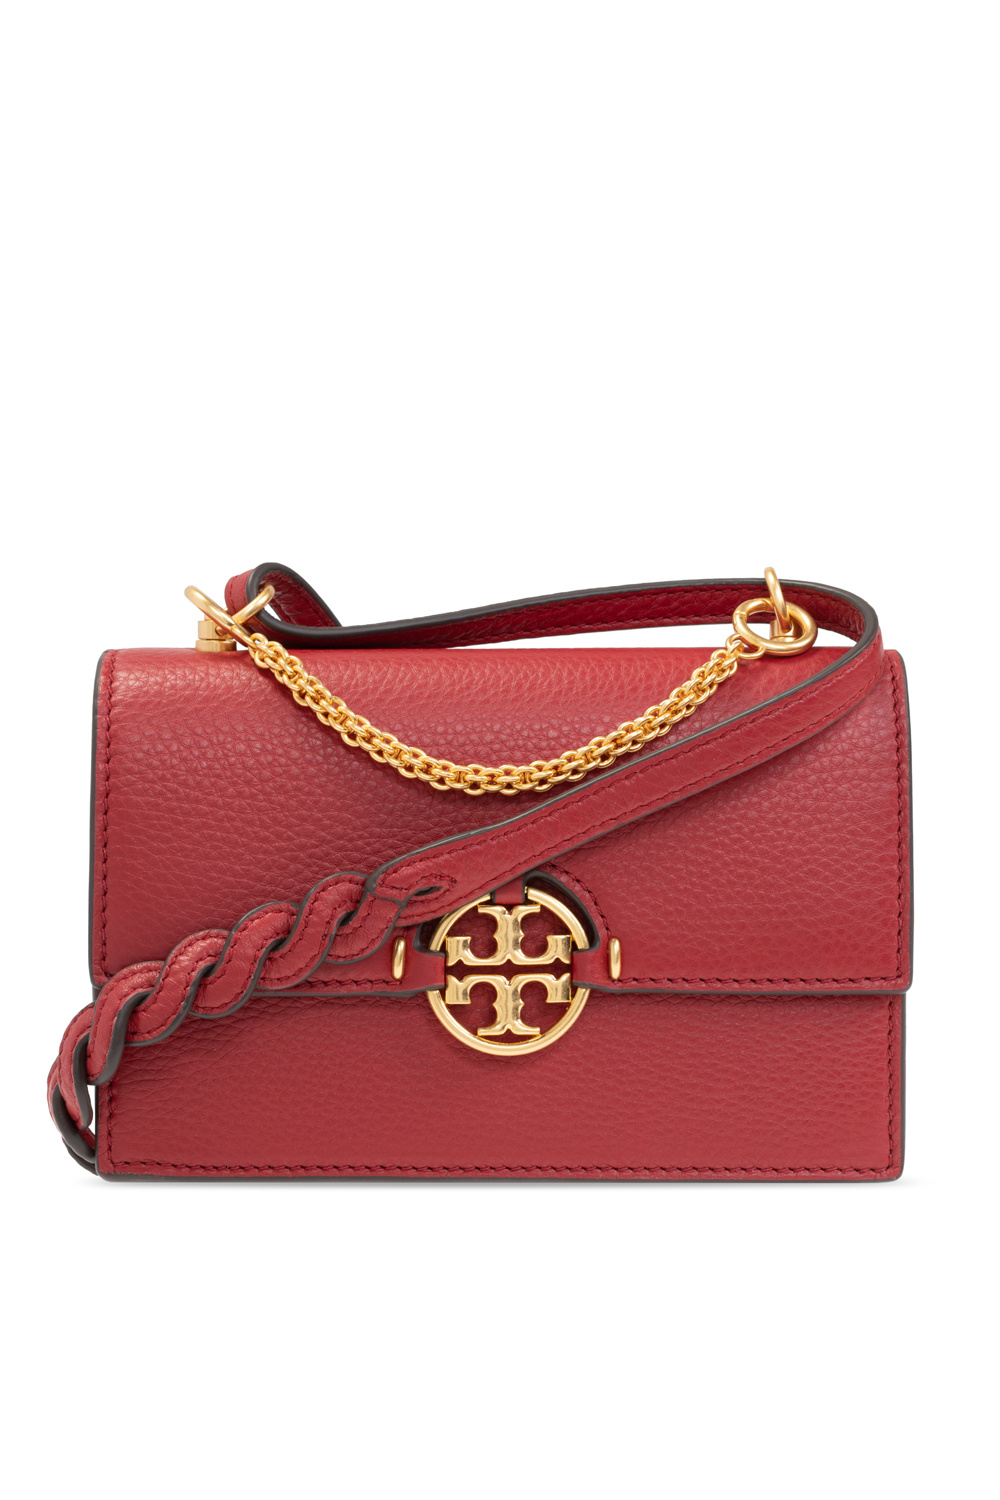 the miller affect wearing a tory burch crossbody from the